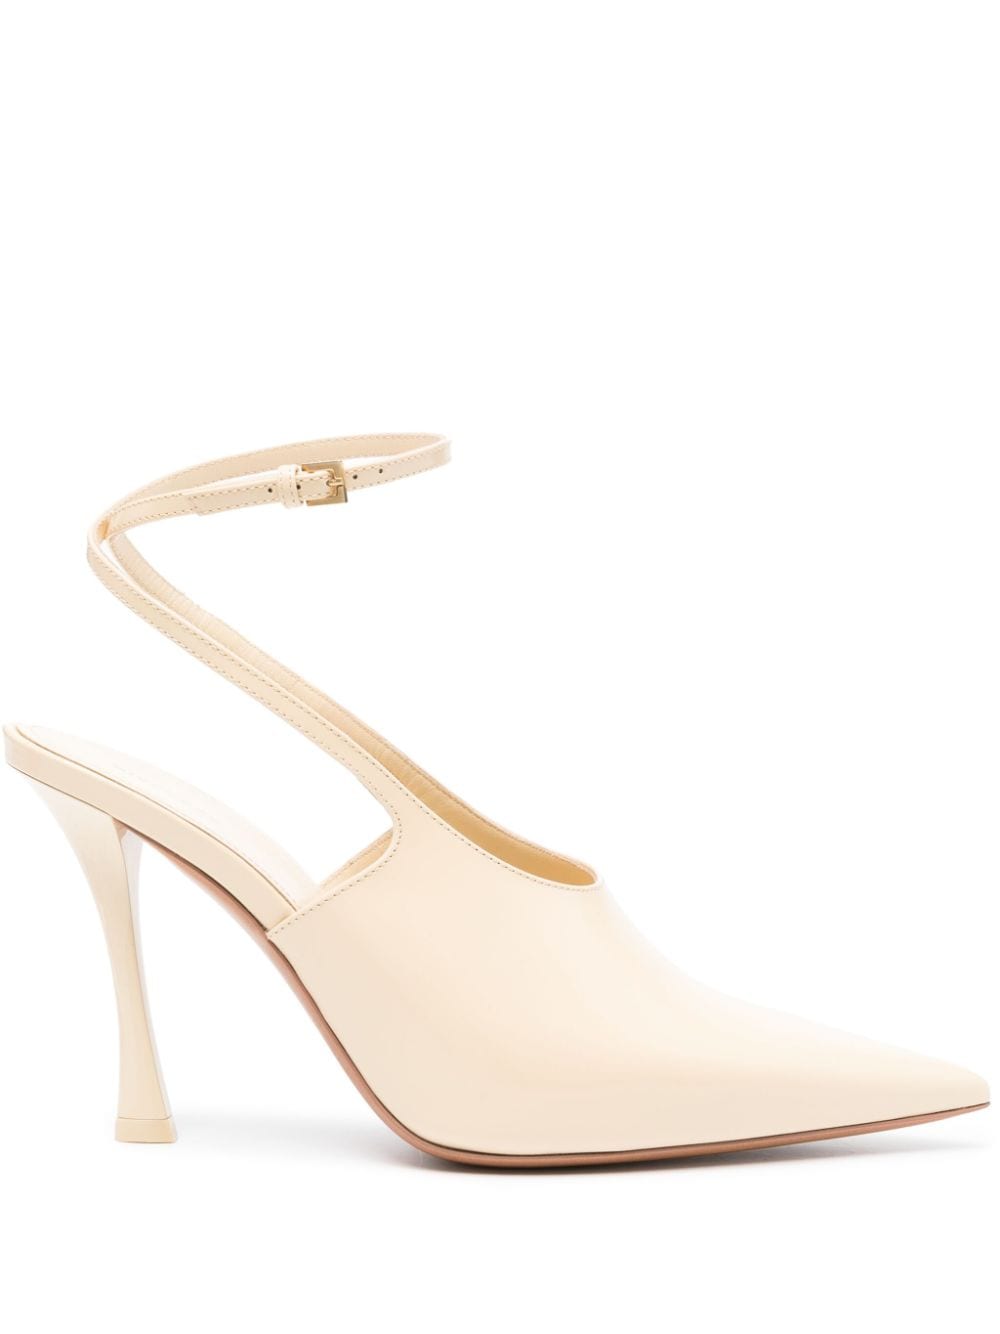 Givenchy Show 105mm leather pumps - Neutrals von Givenchy